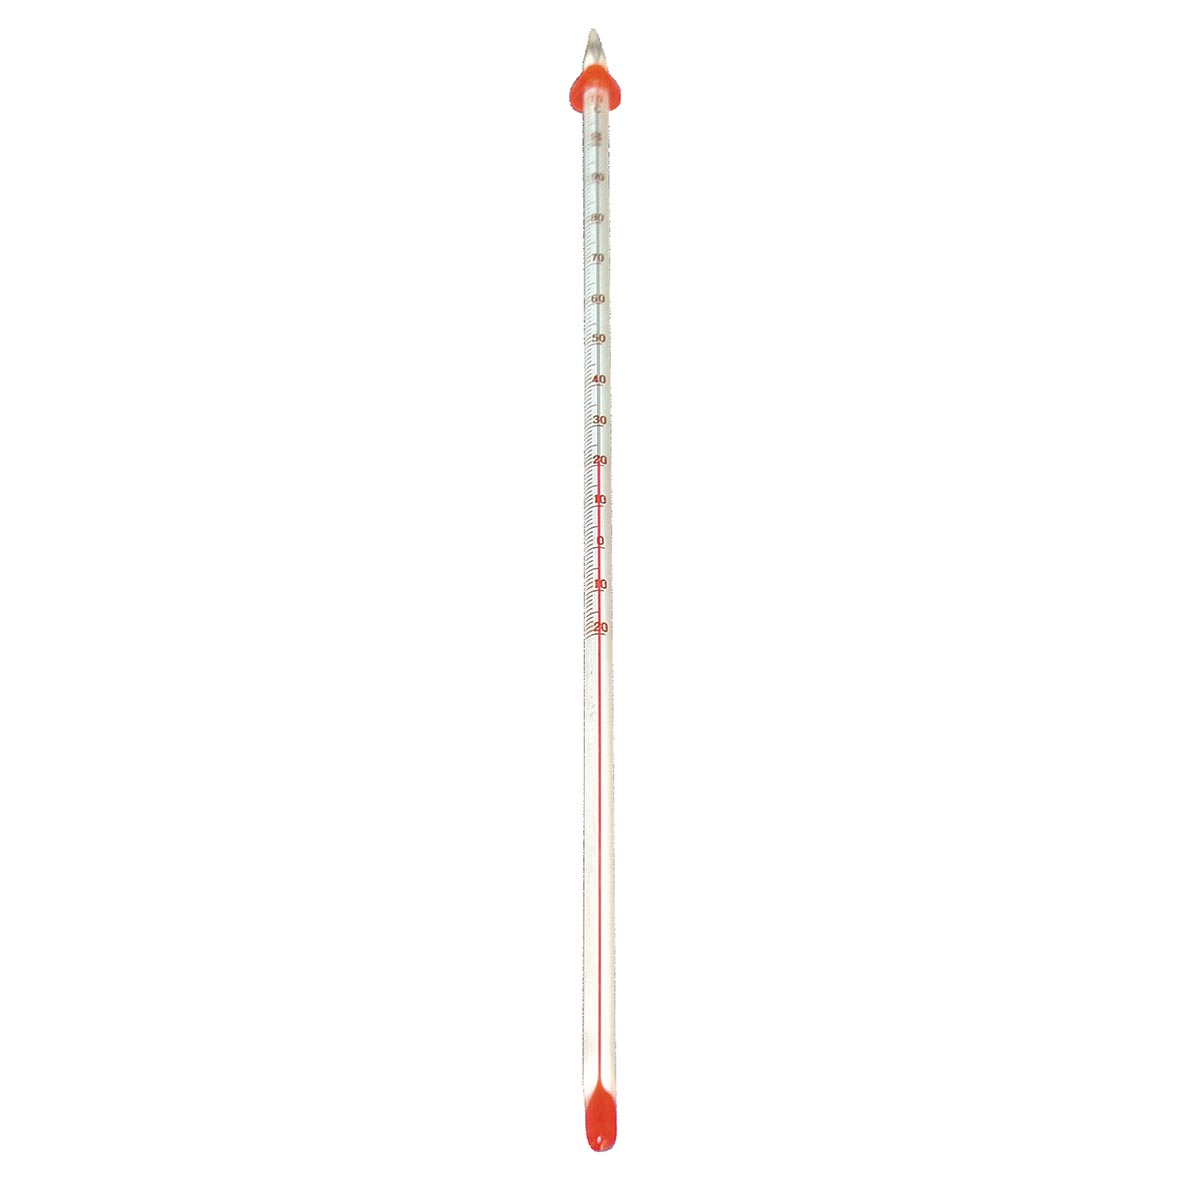 thermometer in science